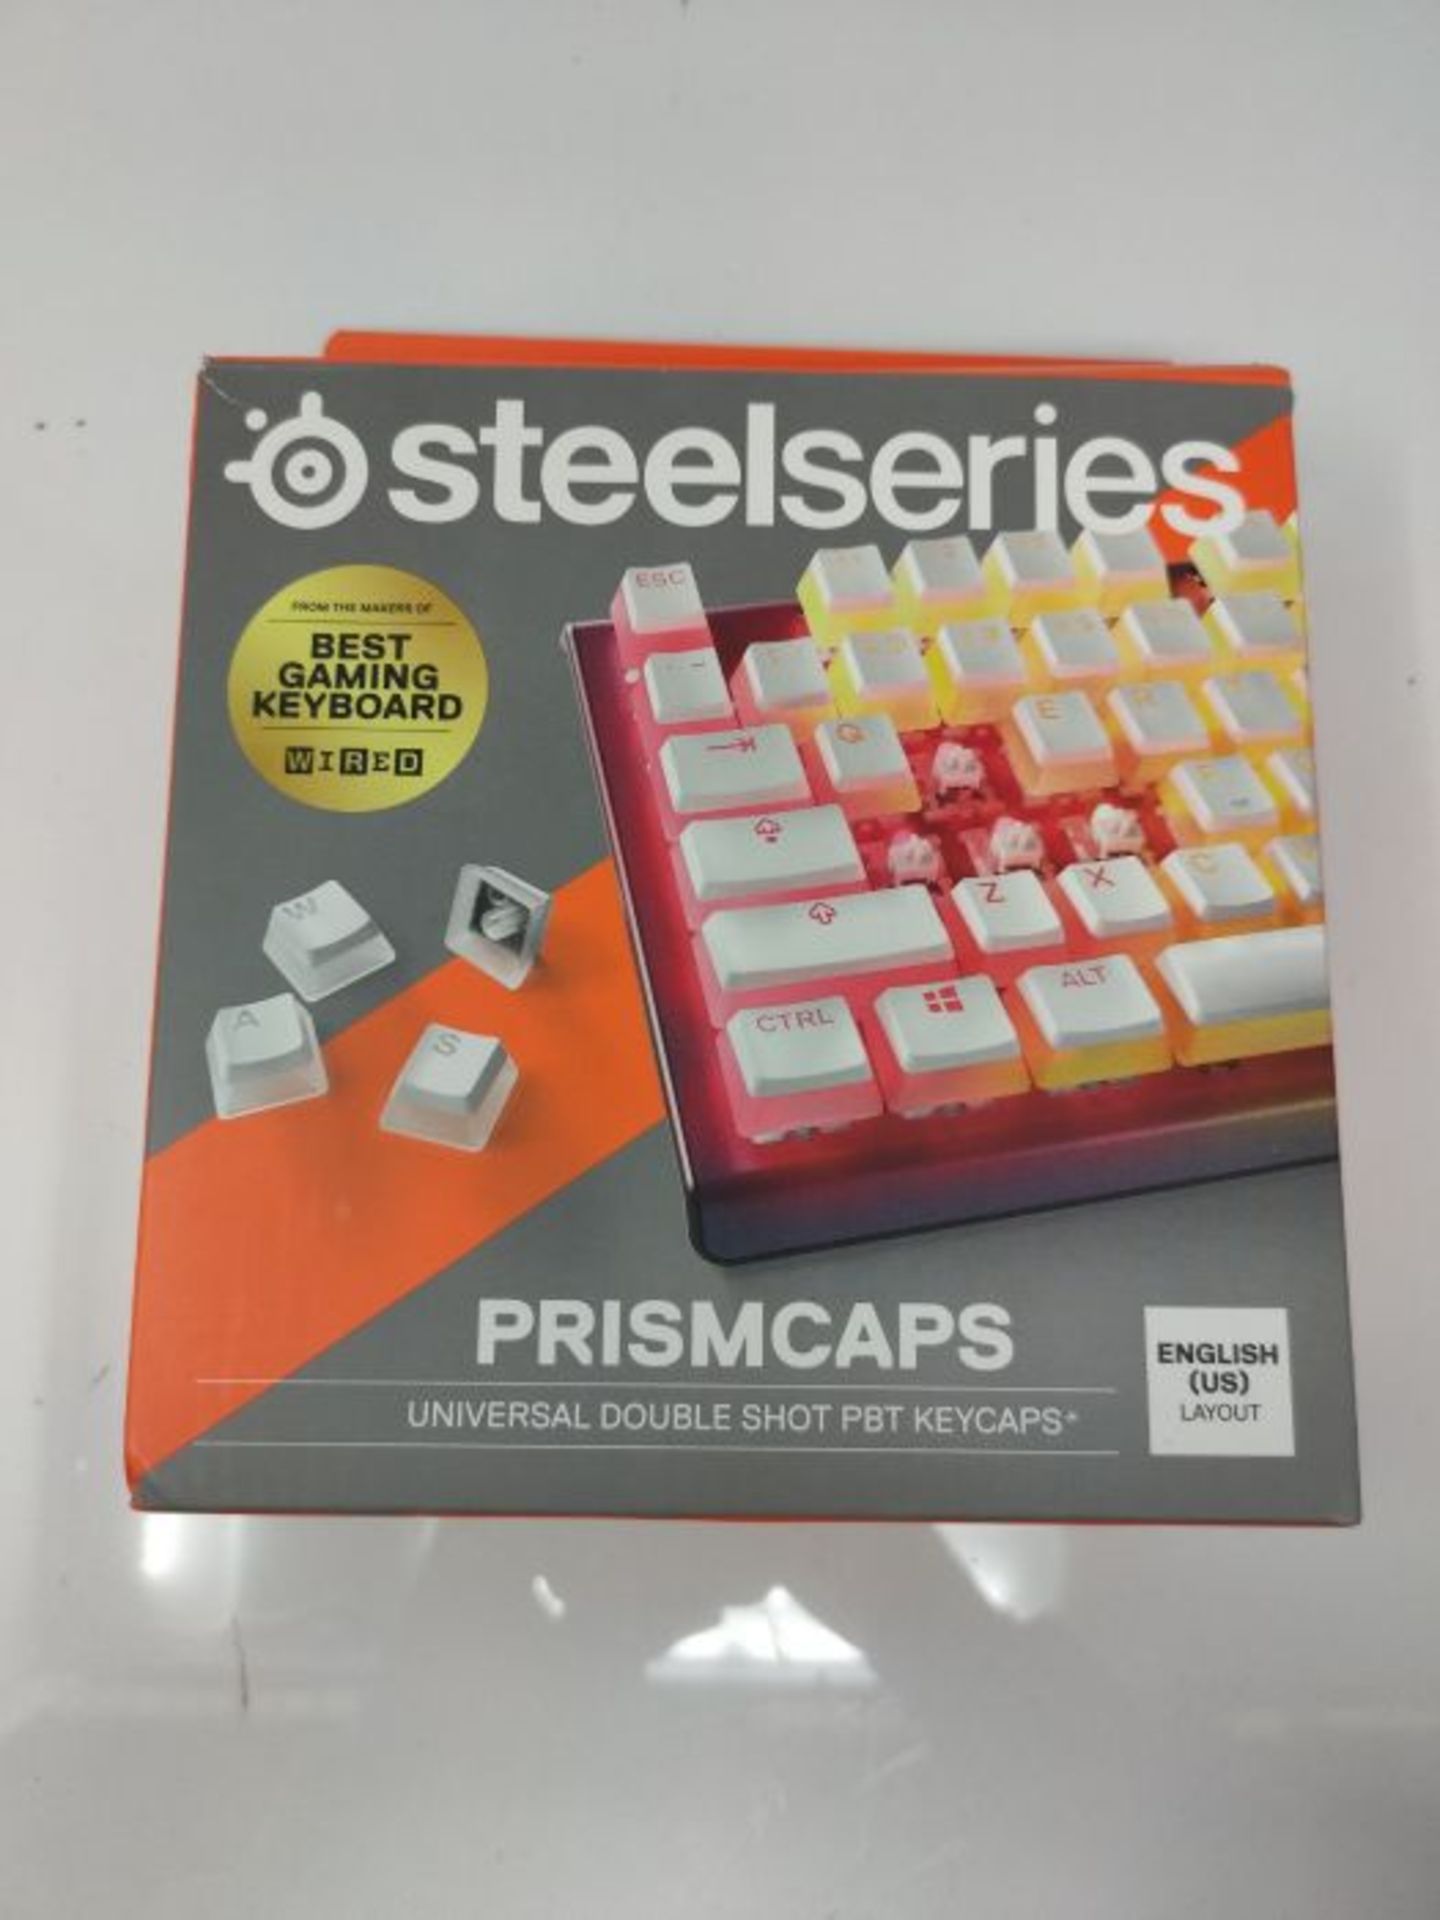 SteelSeries PrismCaps - Double Shot Pudding-style Keycaps - Durable PBT Thermoplastic - Image 2 of 3